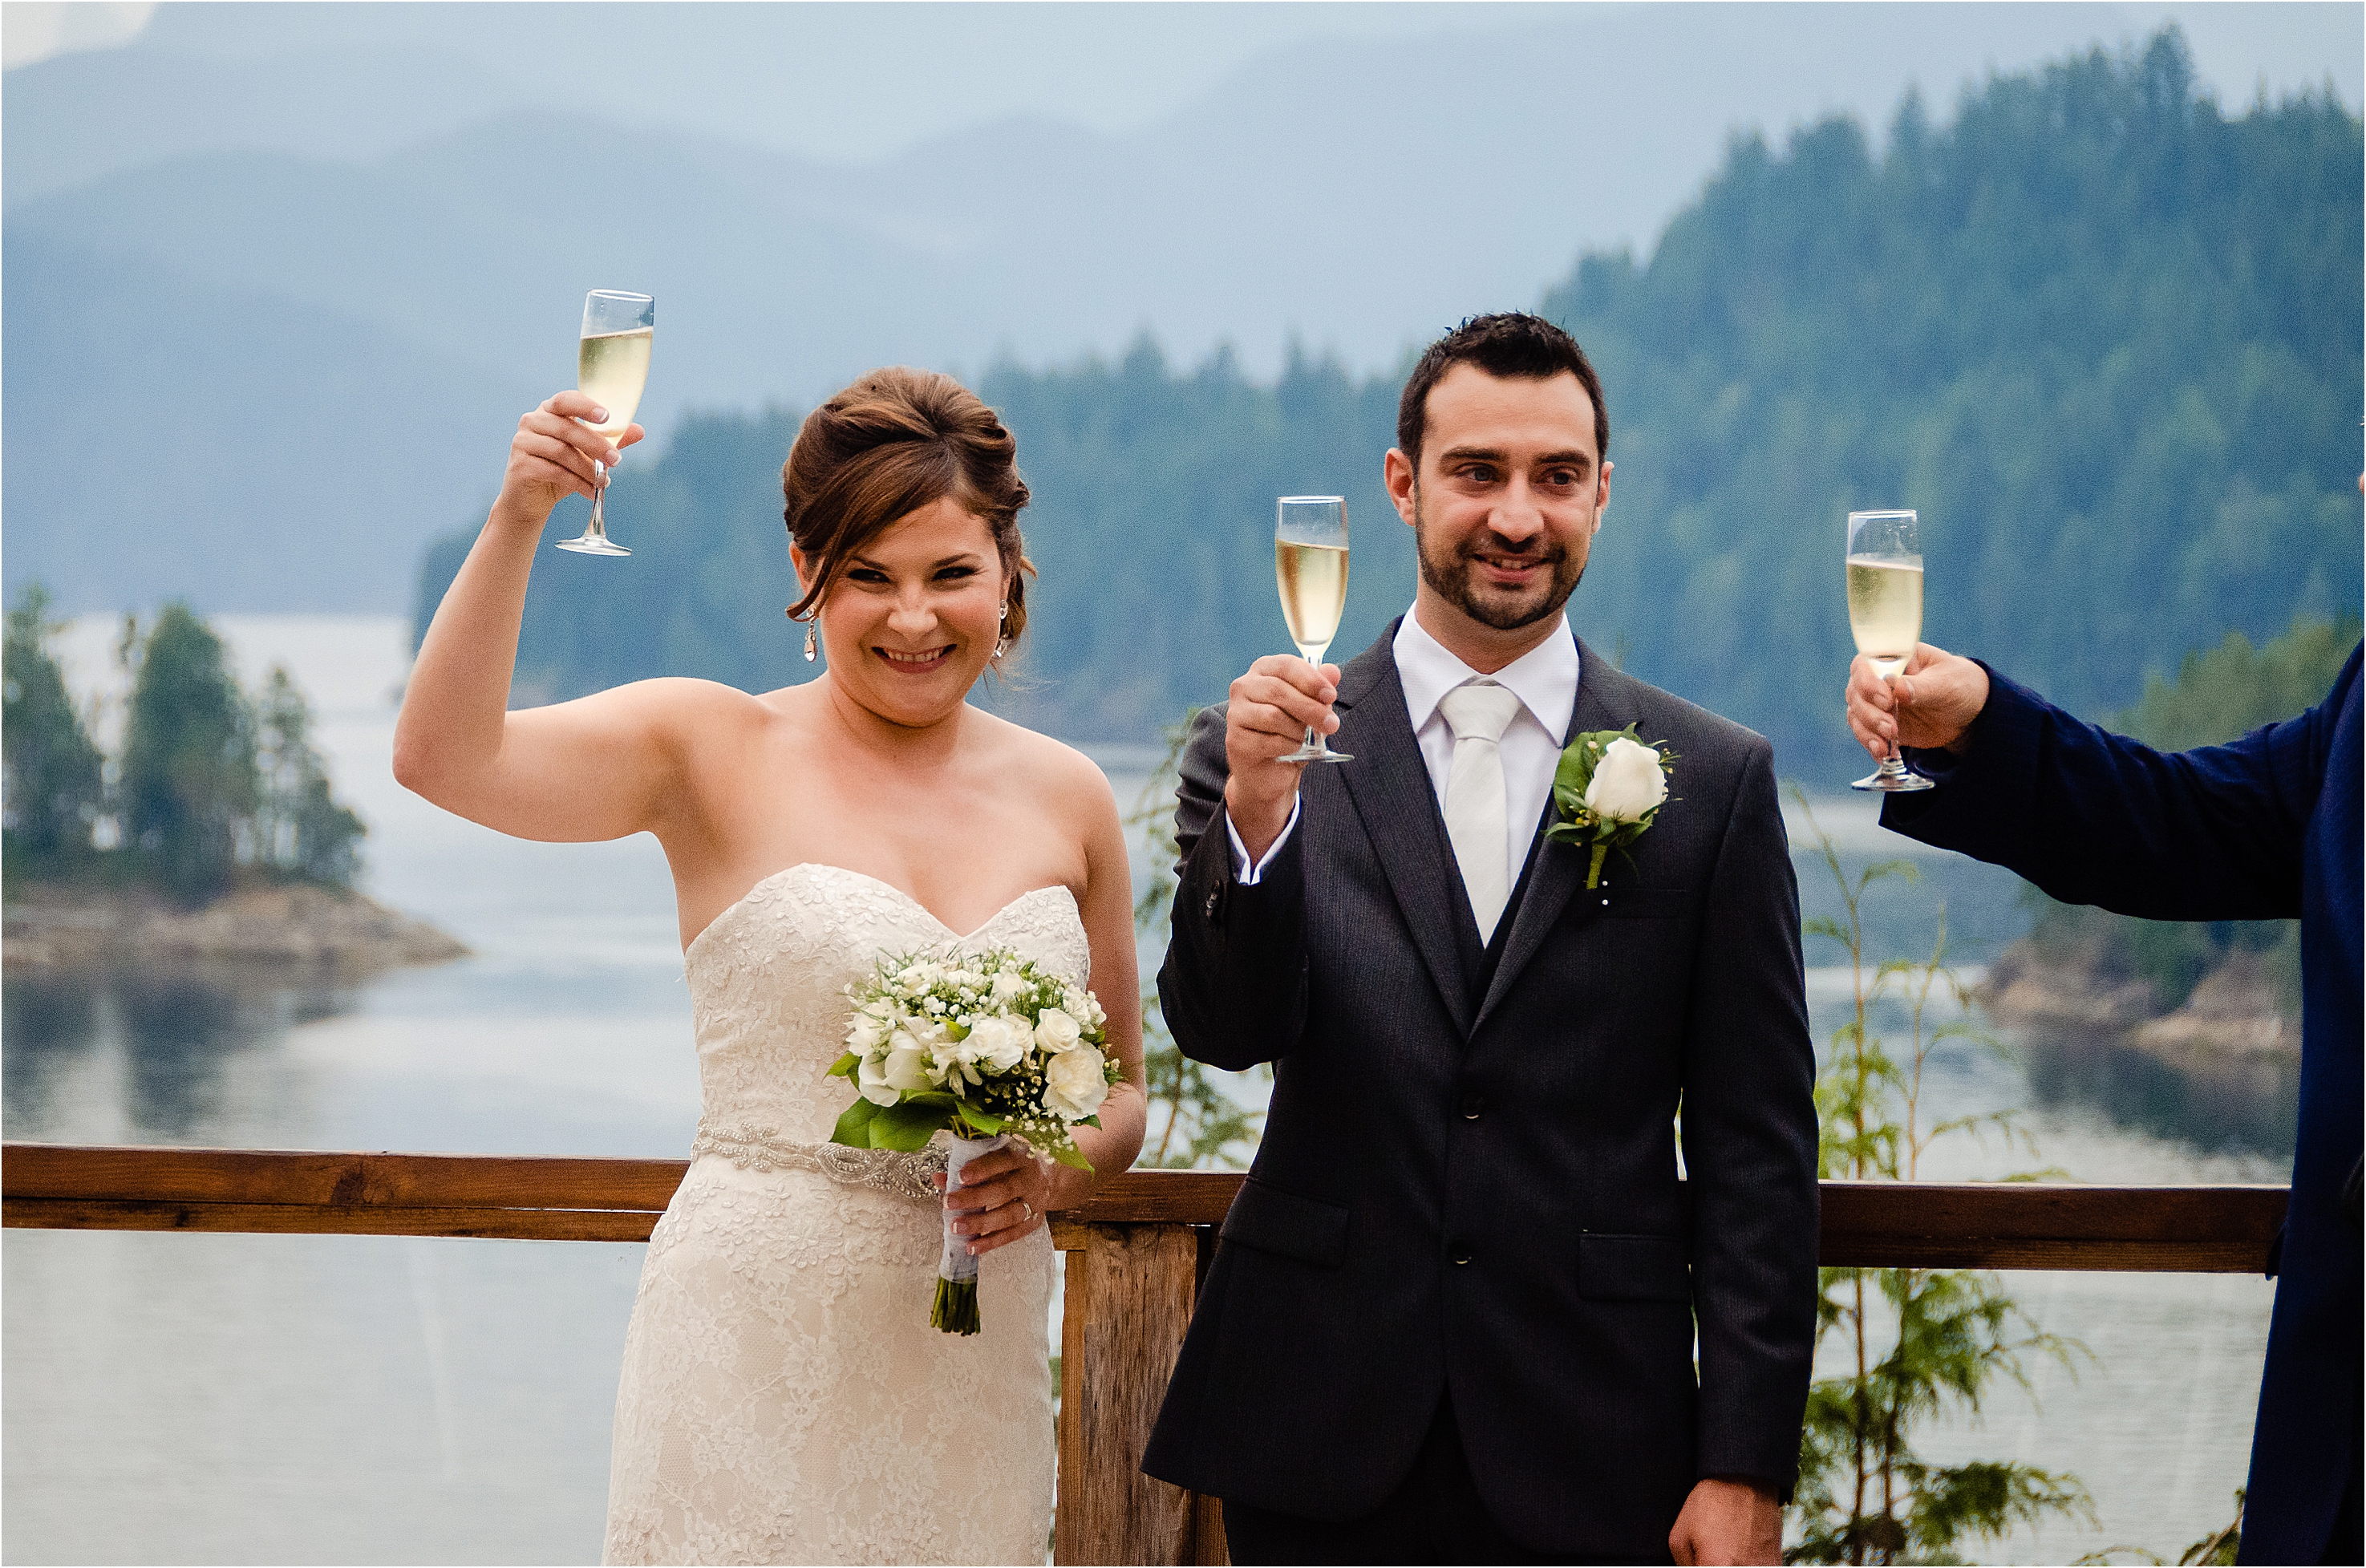 Bride and groom toast champagne after marriage vows